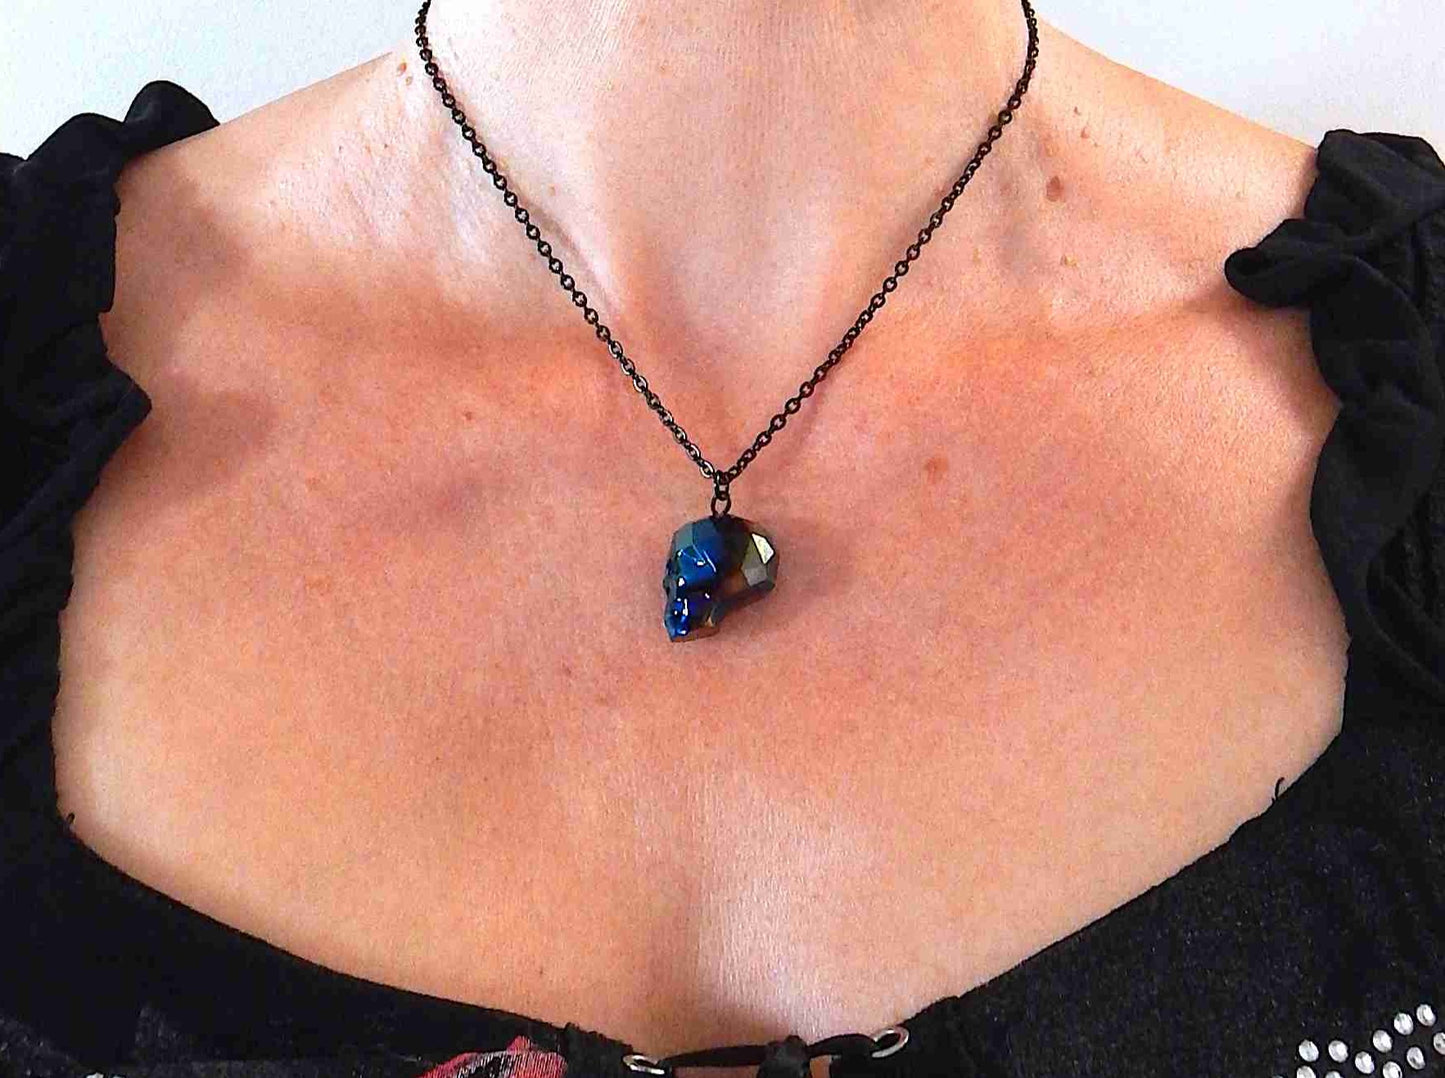 16-inch necklace with rare 20mm Swarovski faceted skull pendant in 3 colours (dark blue, dark gray, rose gold), matching stainless steel chain